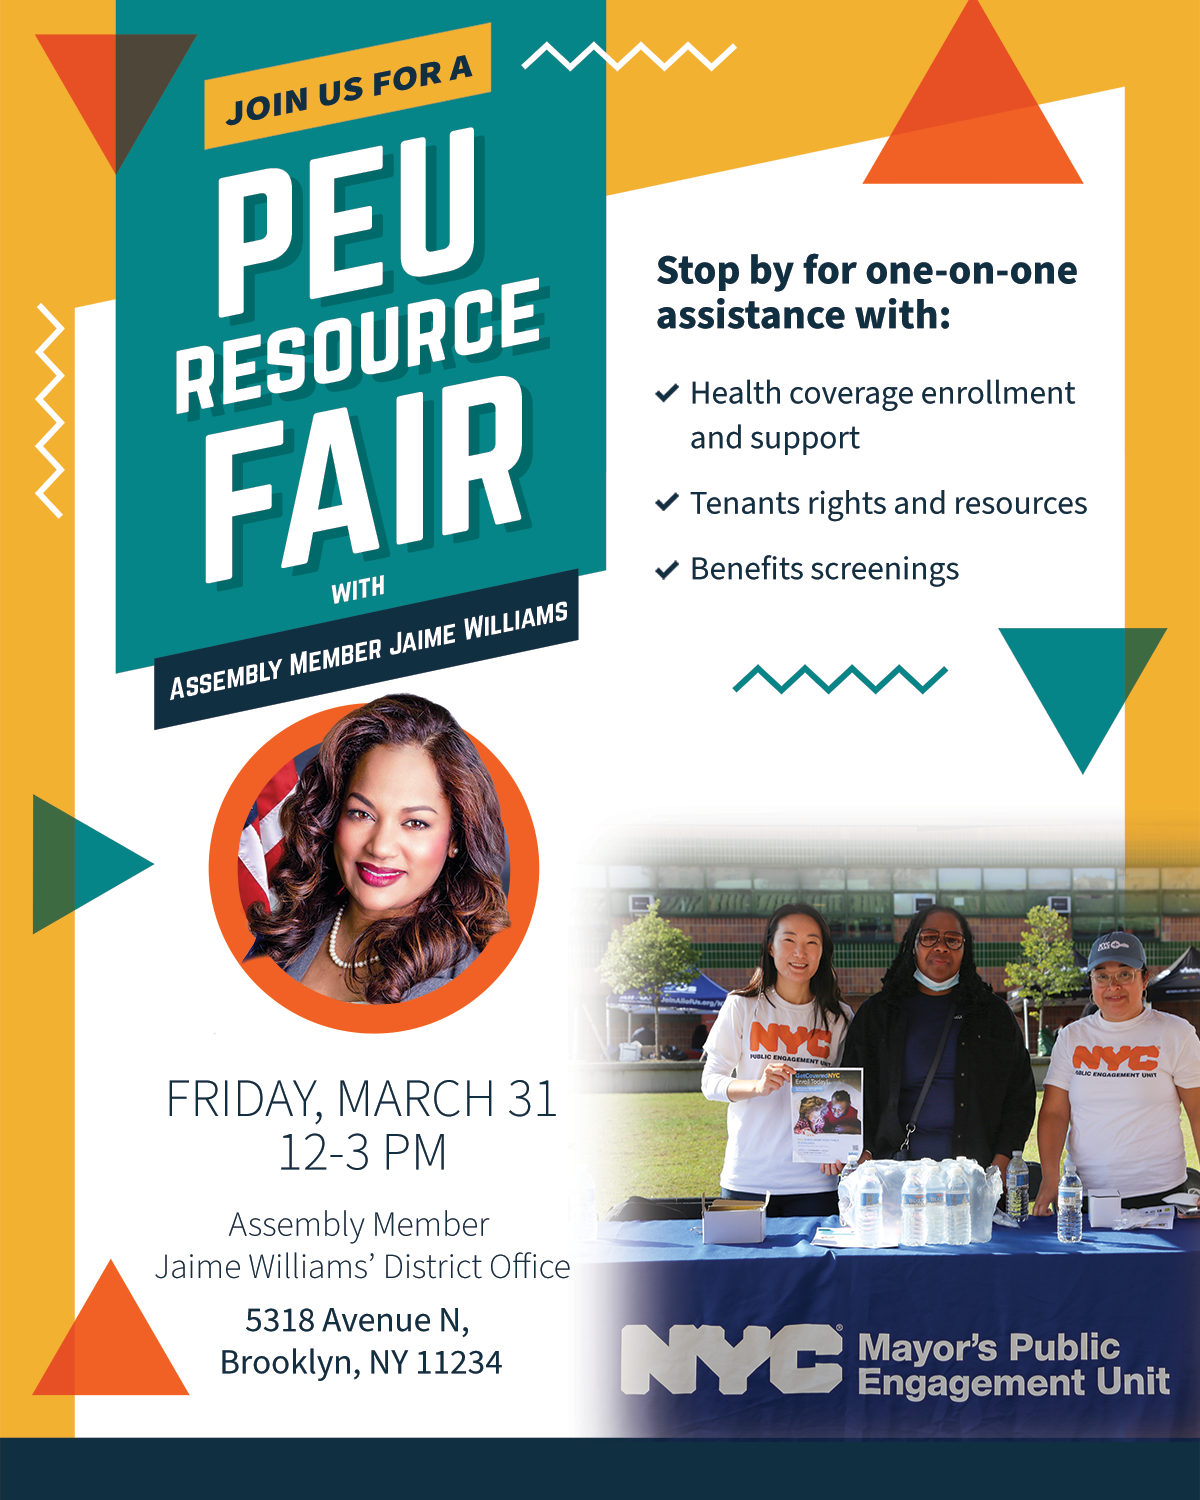 Join us for a PEU Resource Fair on March 31